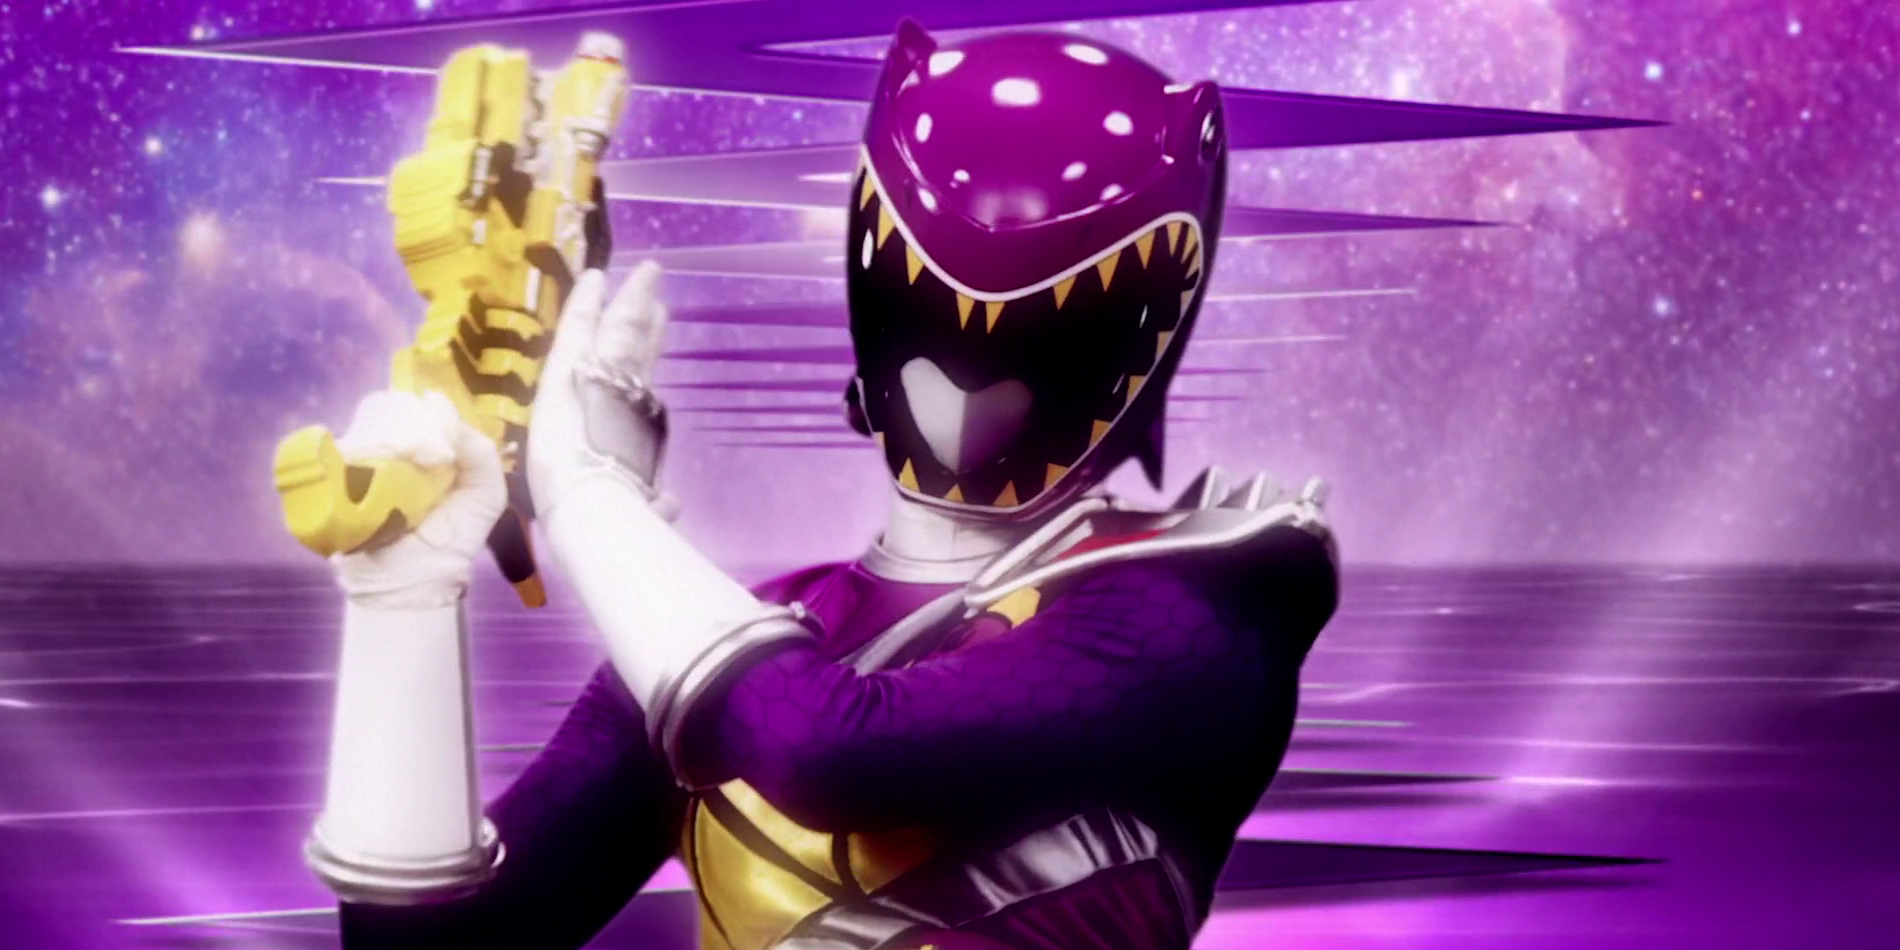 Kendall Morgan as the Dino Charge Purple Ranger, from Power Rangers Dino Charge.